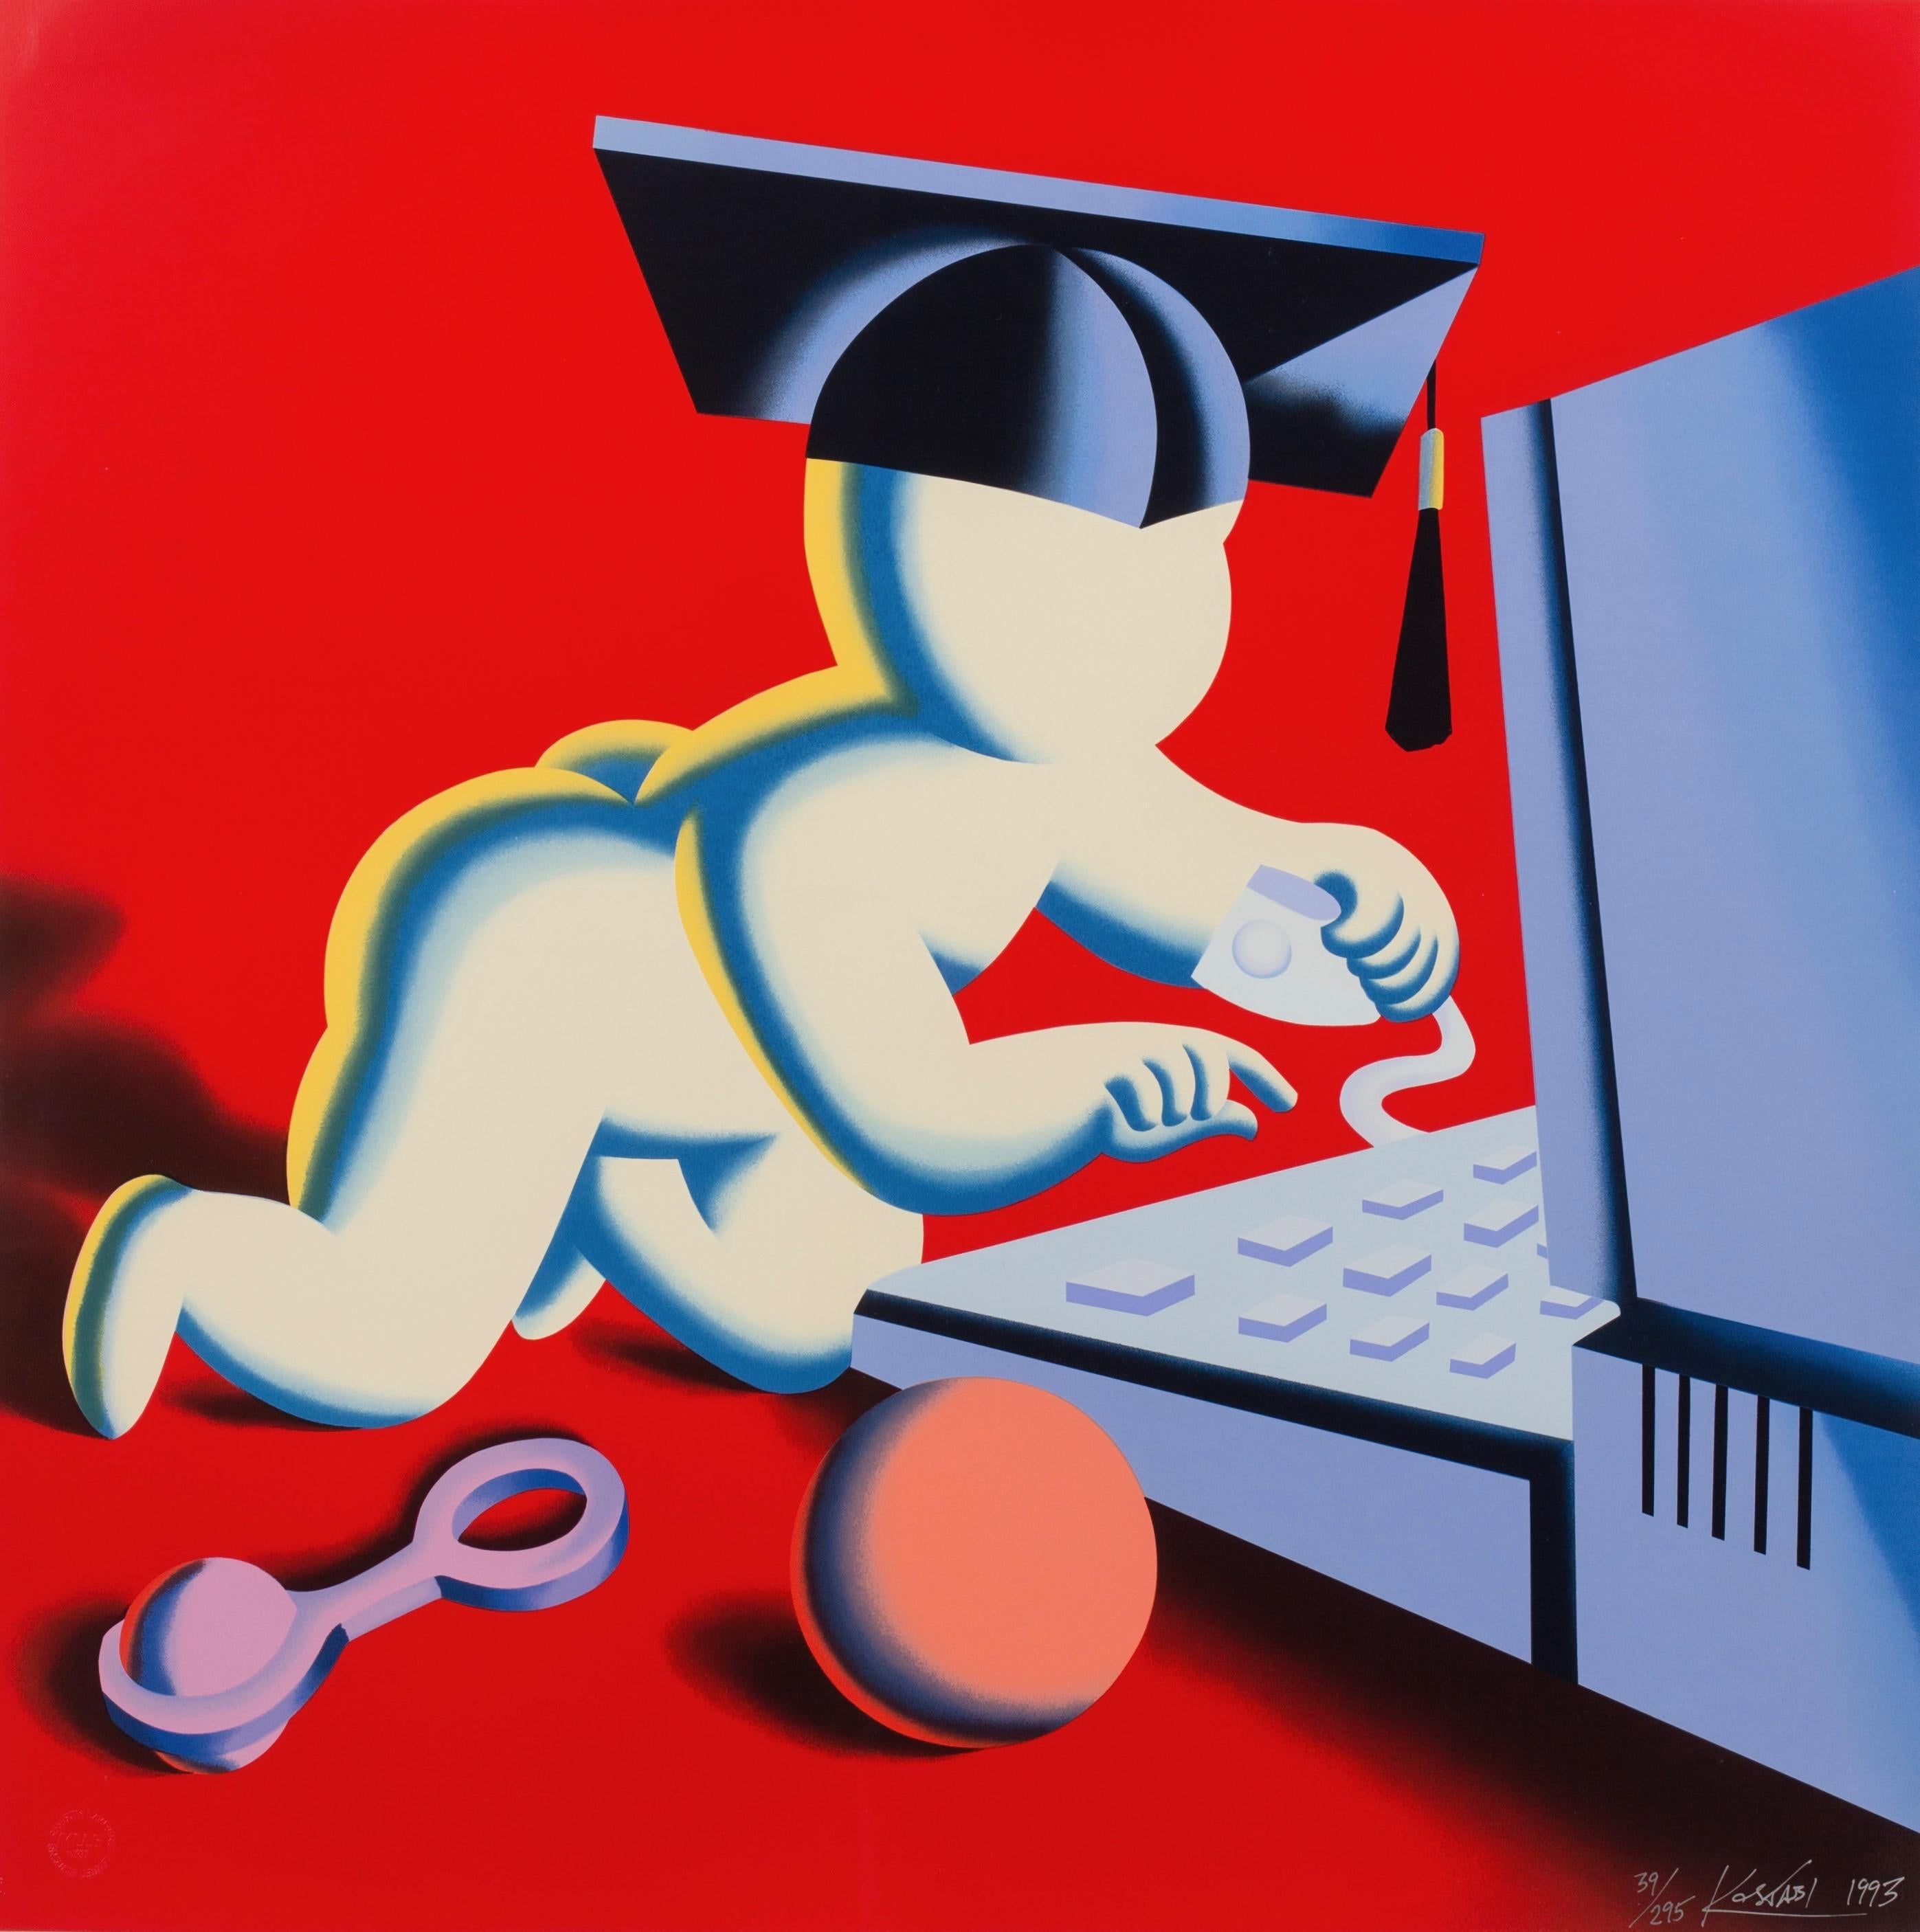 The Early Nerd Gets The Worm - Print by Mark Kostabi